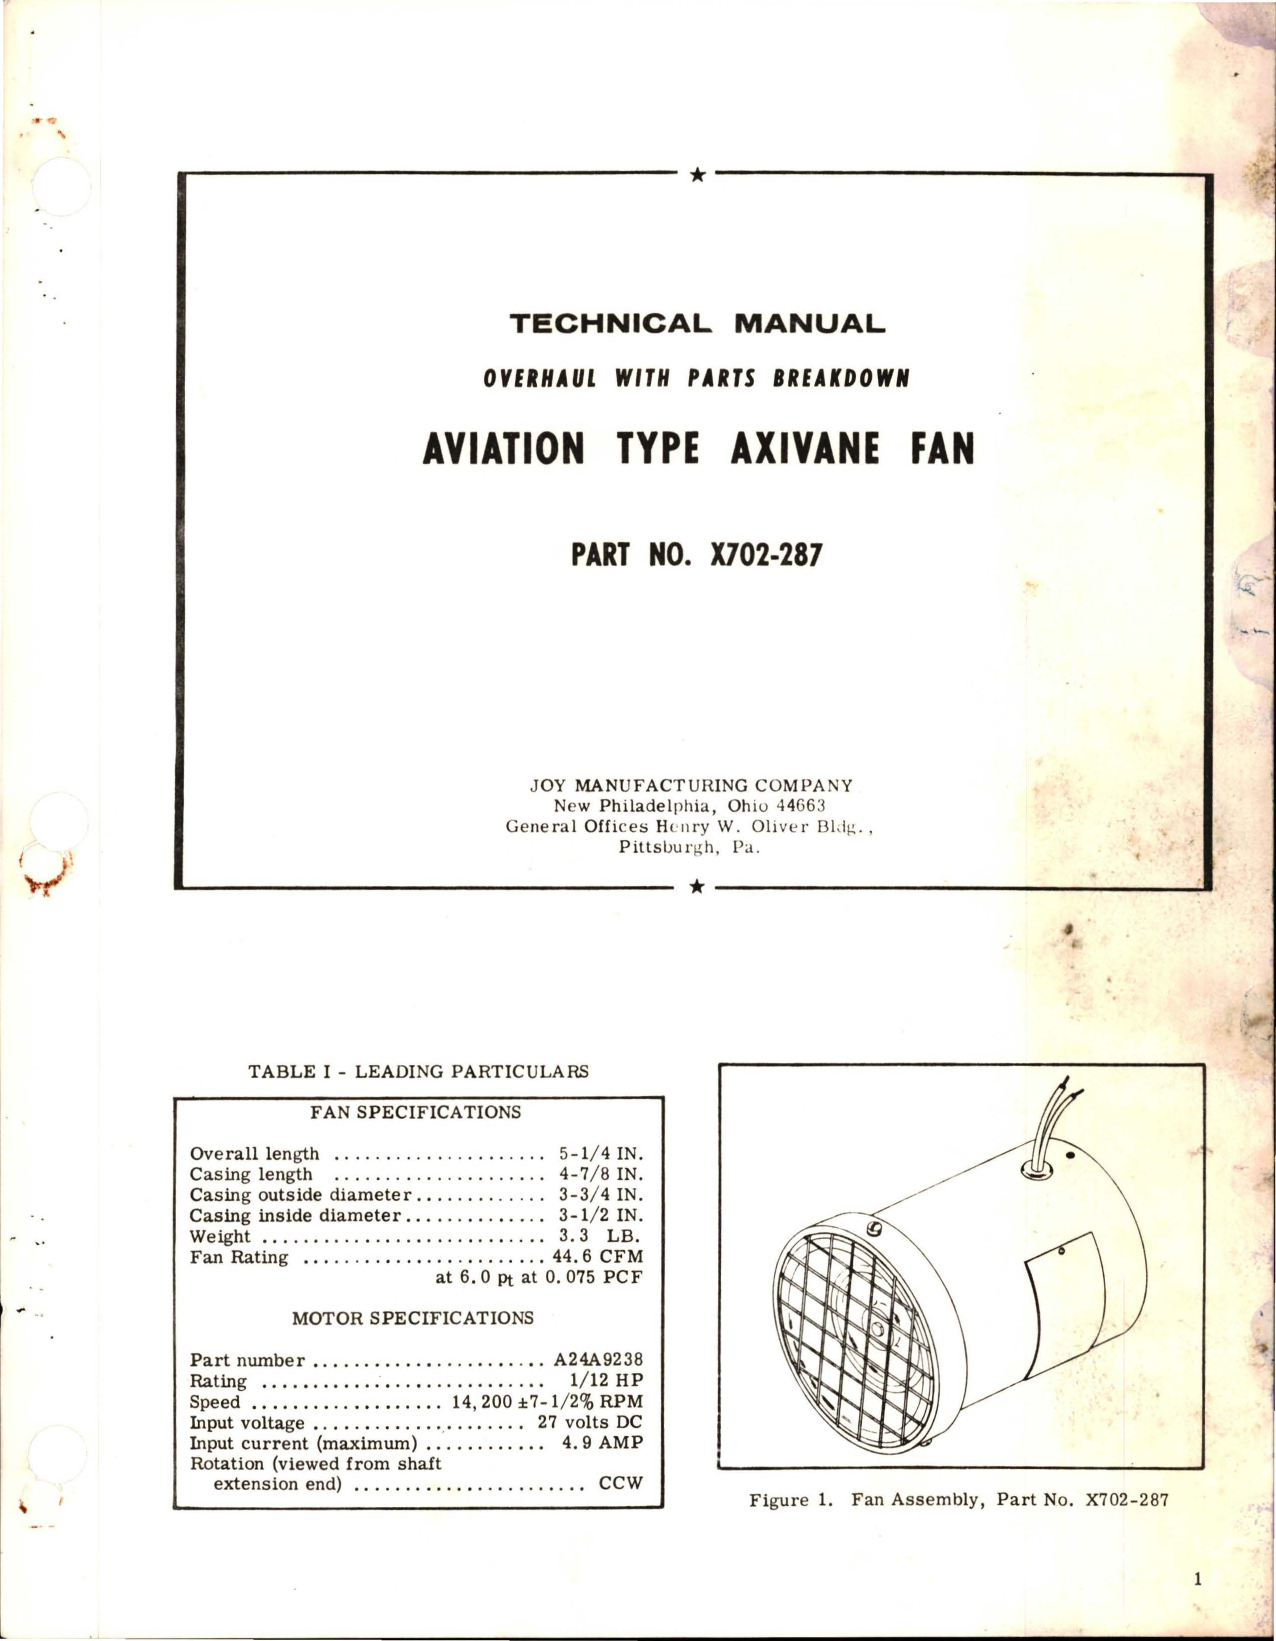 Sample page 1 from AirCorps Library document: Overhaul with Parts Breakdown for Aviation Type Axivane Fan - Part X702-287 